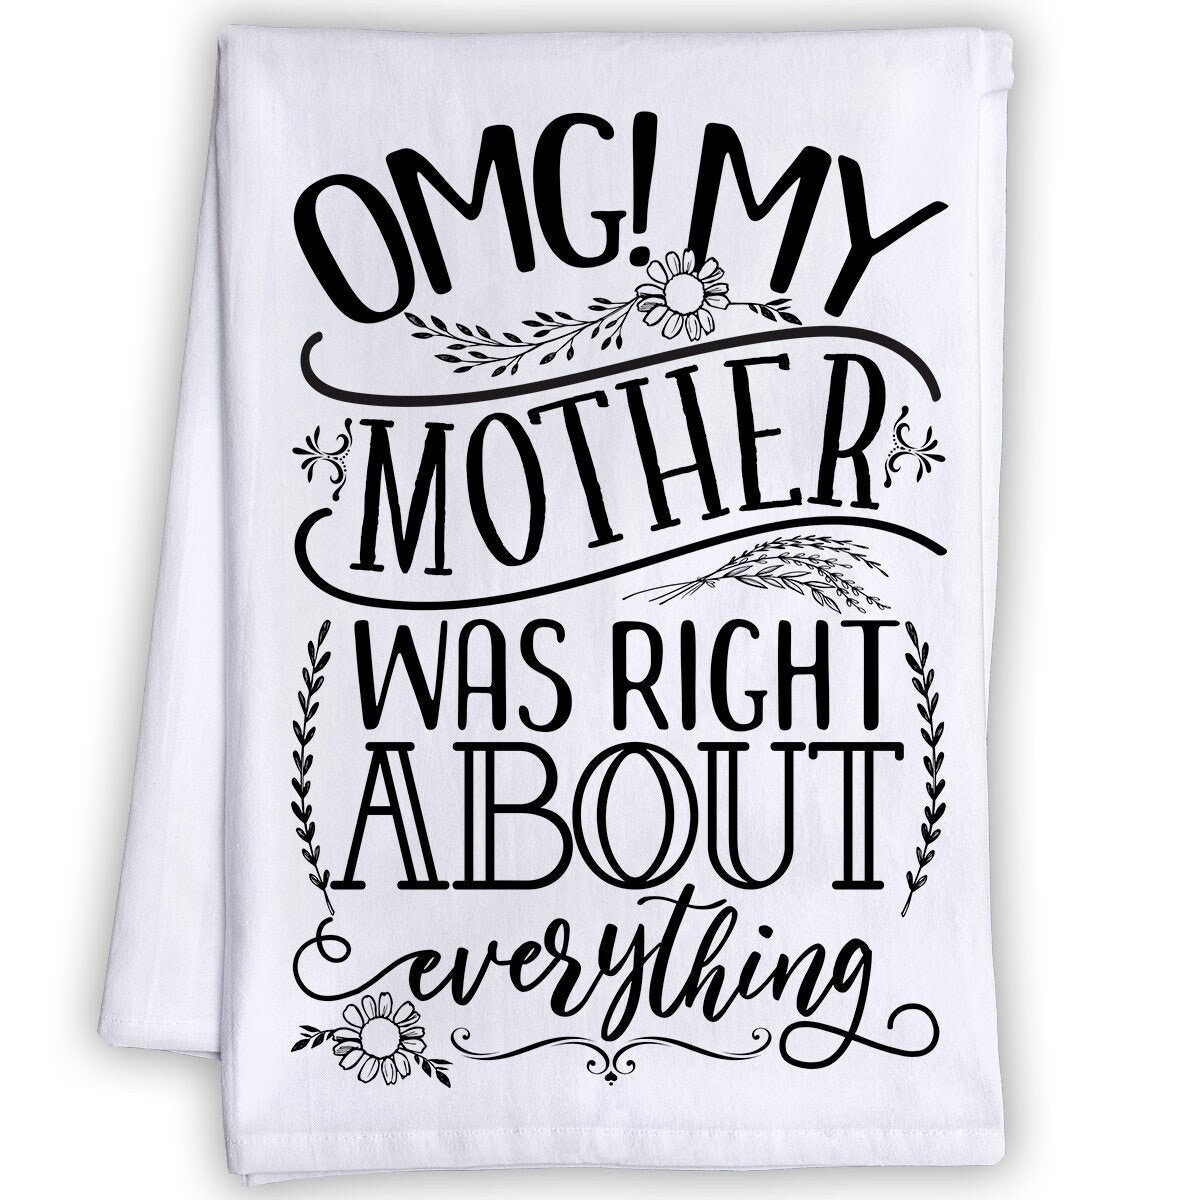 https://lonestarart.com/cdn/shop/products/funny-kitchen-tea-towels-omg-my-mother-was-right-about-everything-humorous-fun-sayings-cute-housewarming-giftfun-home-decor-lone-star-art-174544_1445x.jpg?v=1643224526